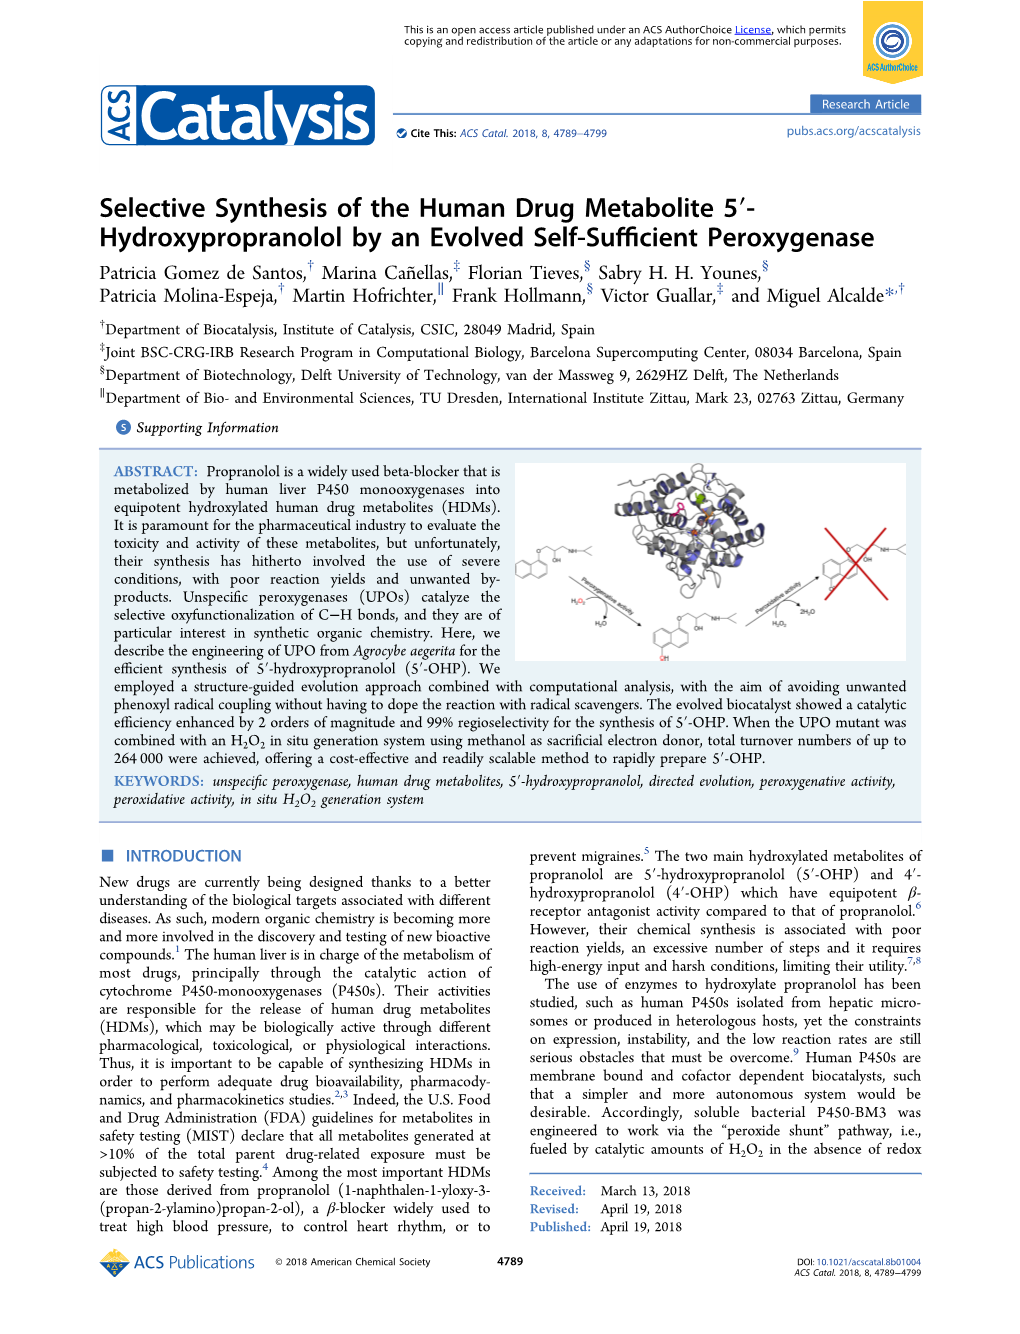 Selective Synthesis of the Human Drug Metabolite 5′-Hydroxypropranolol by an Evolved Self-Sufficient Peroxygenase